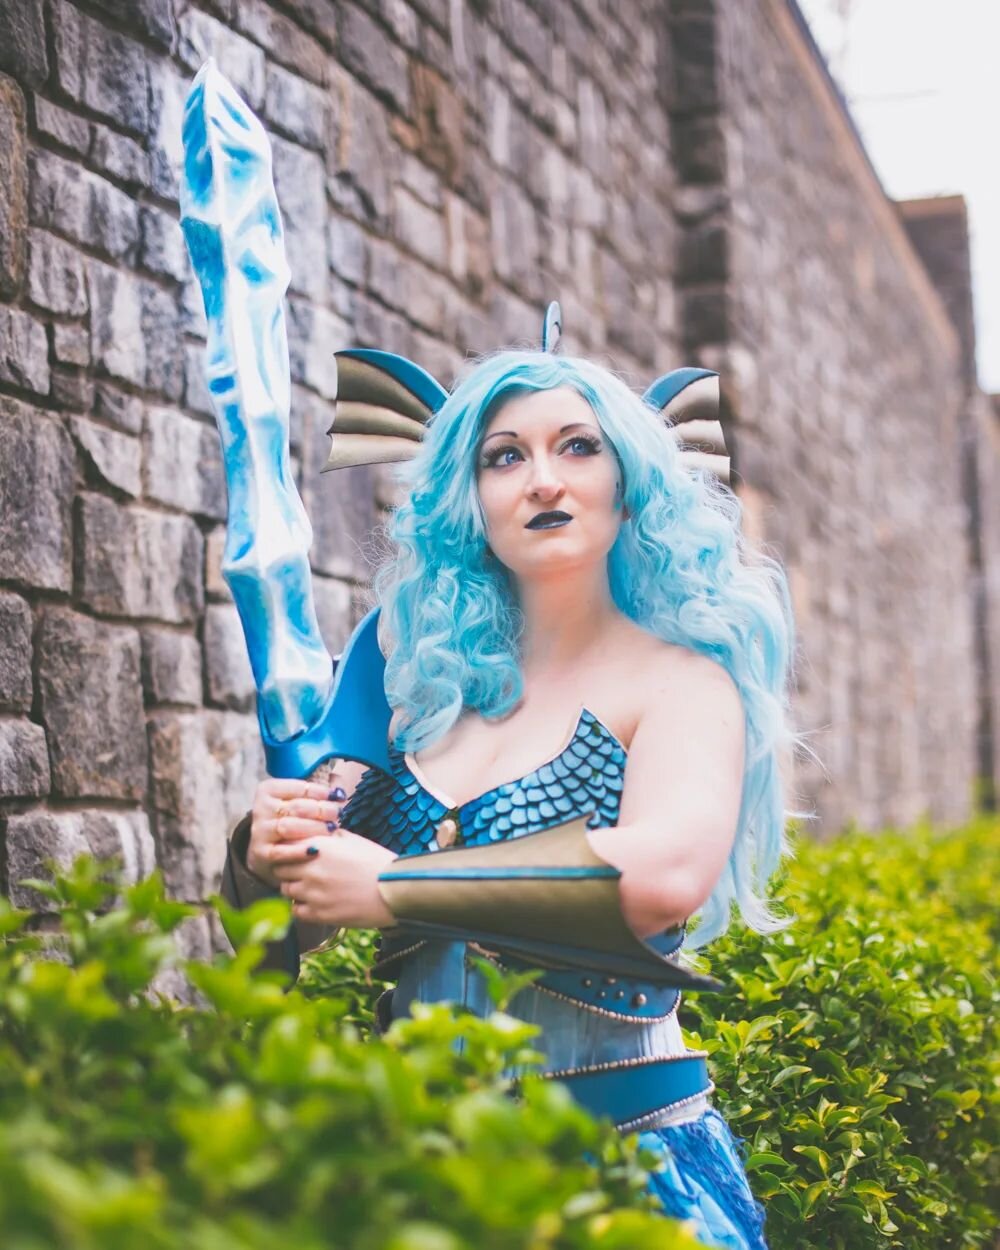 hi. this is the closest i'll get to a #StarWars cosplay. but hey, happy #May4th !

Photo Credit to bestest bean @depthoflight.photo

Original design Vaporeon inspired by a Valkyrie Eeveelution group liiiiiiike ages ago.

#MayThe4thBeWithYou #Vaporeon